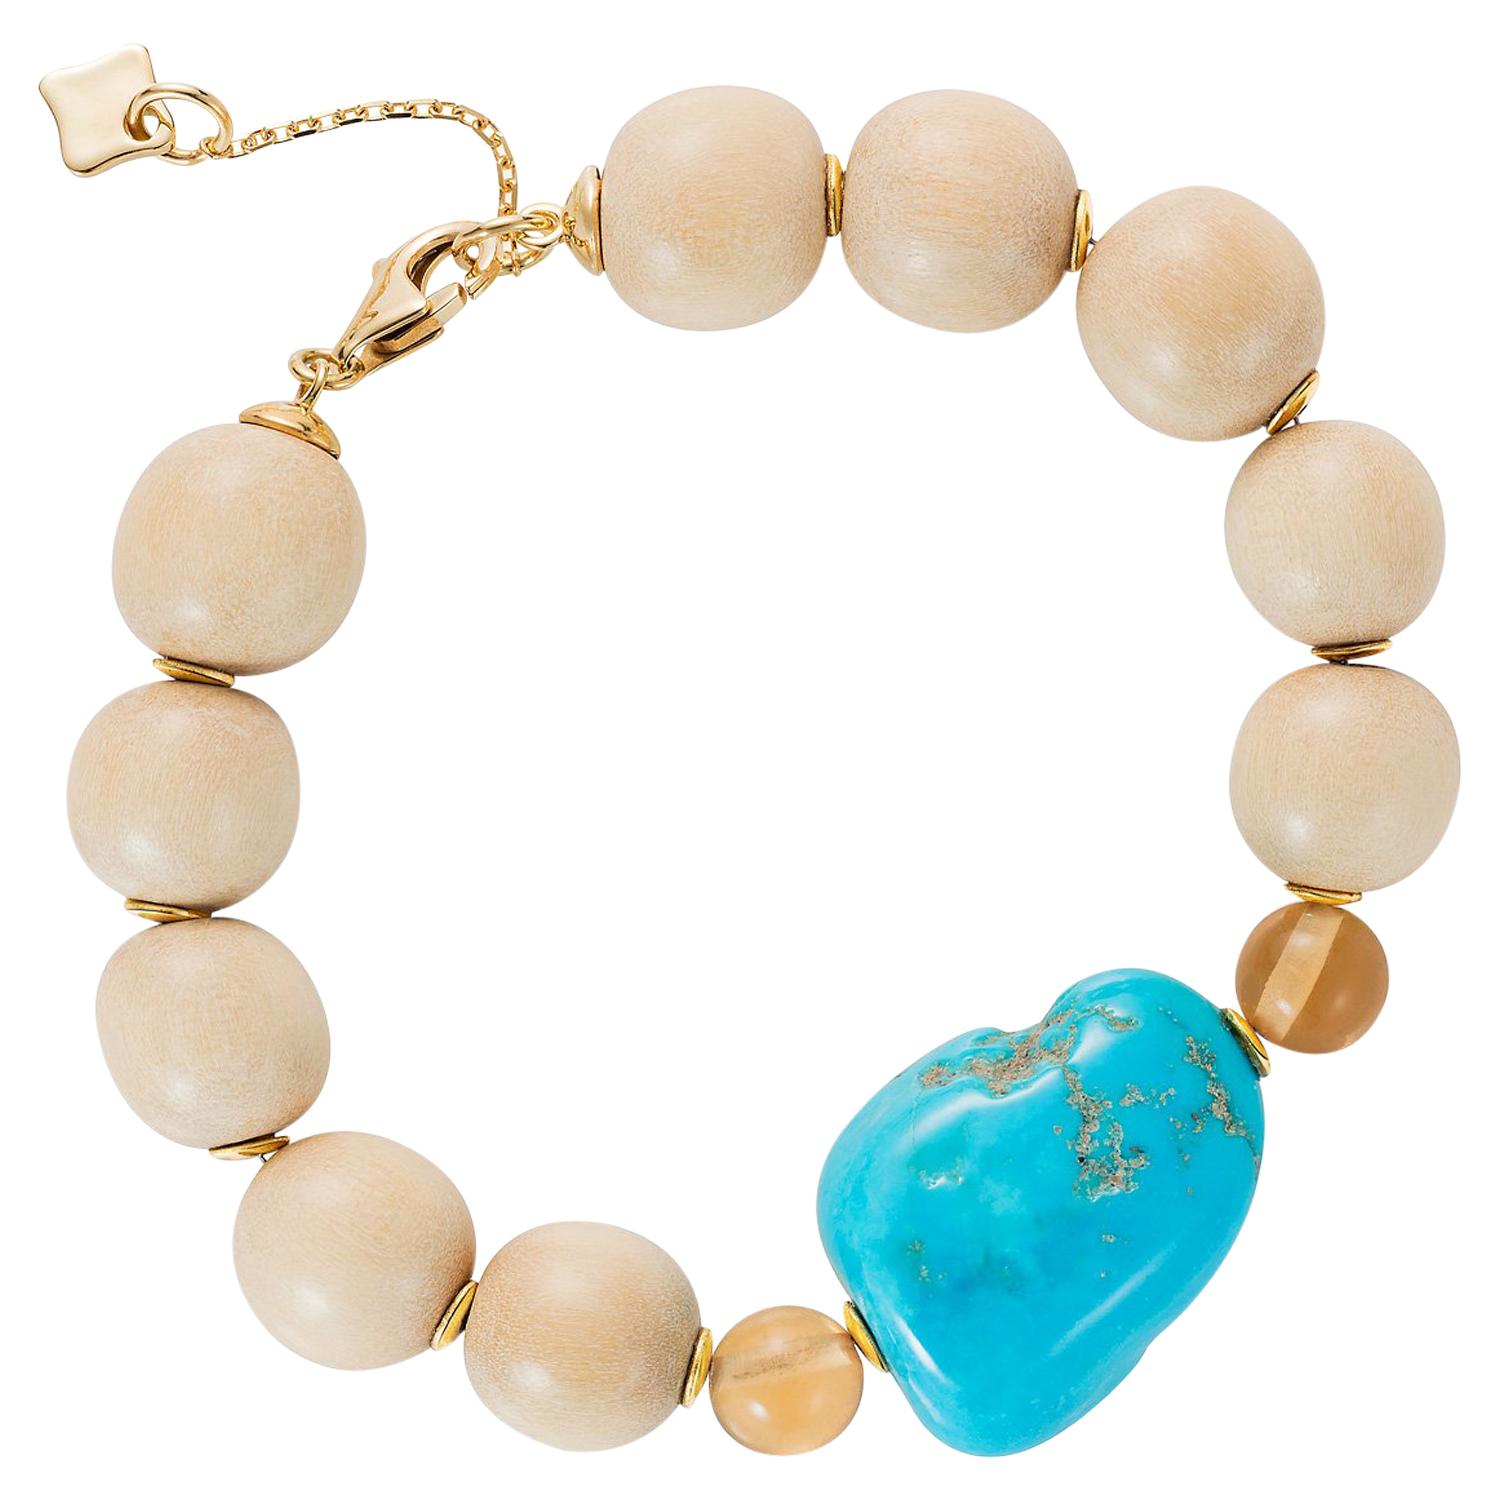  Modern Wooden Bead bracelet with 18k gold discs, Tumbled Turquoise, Champagne